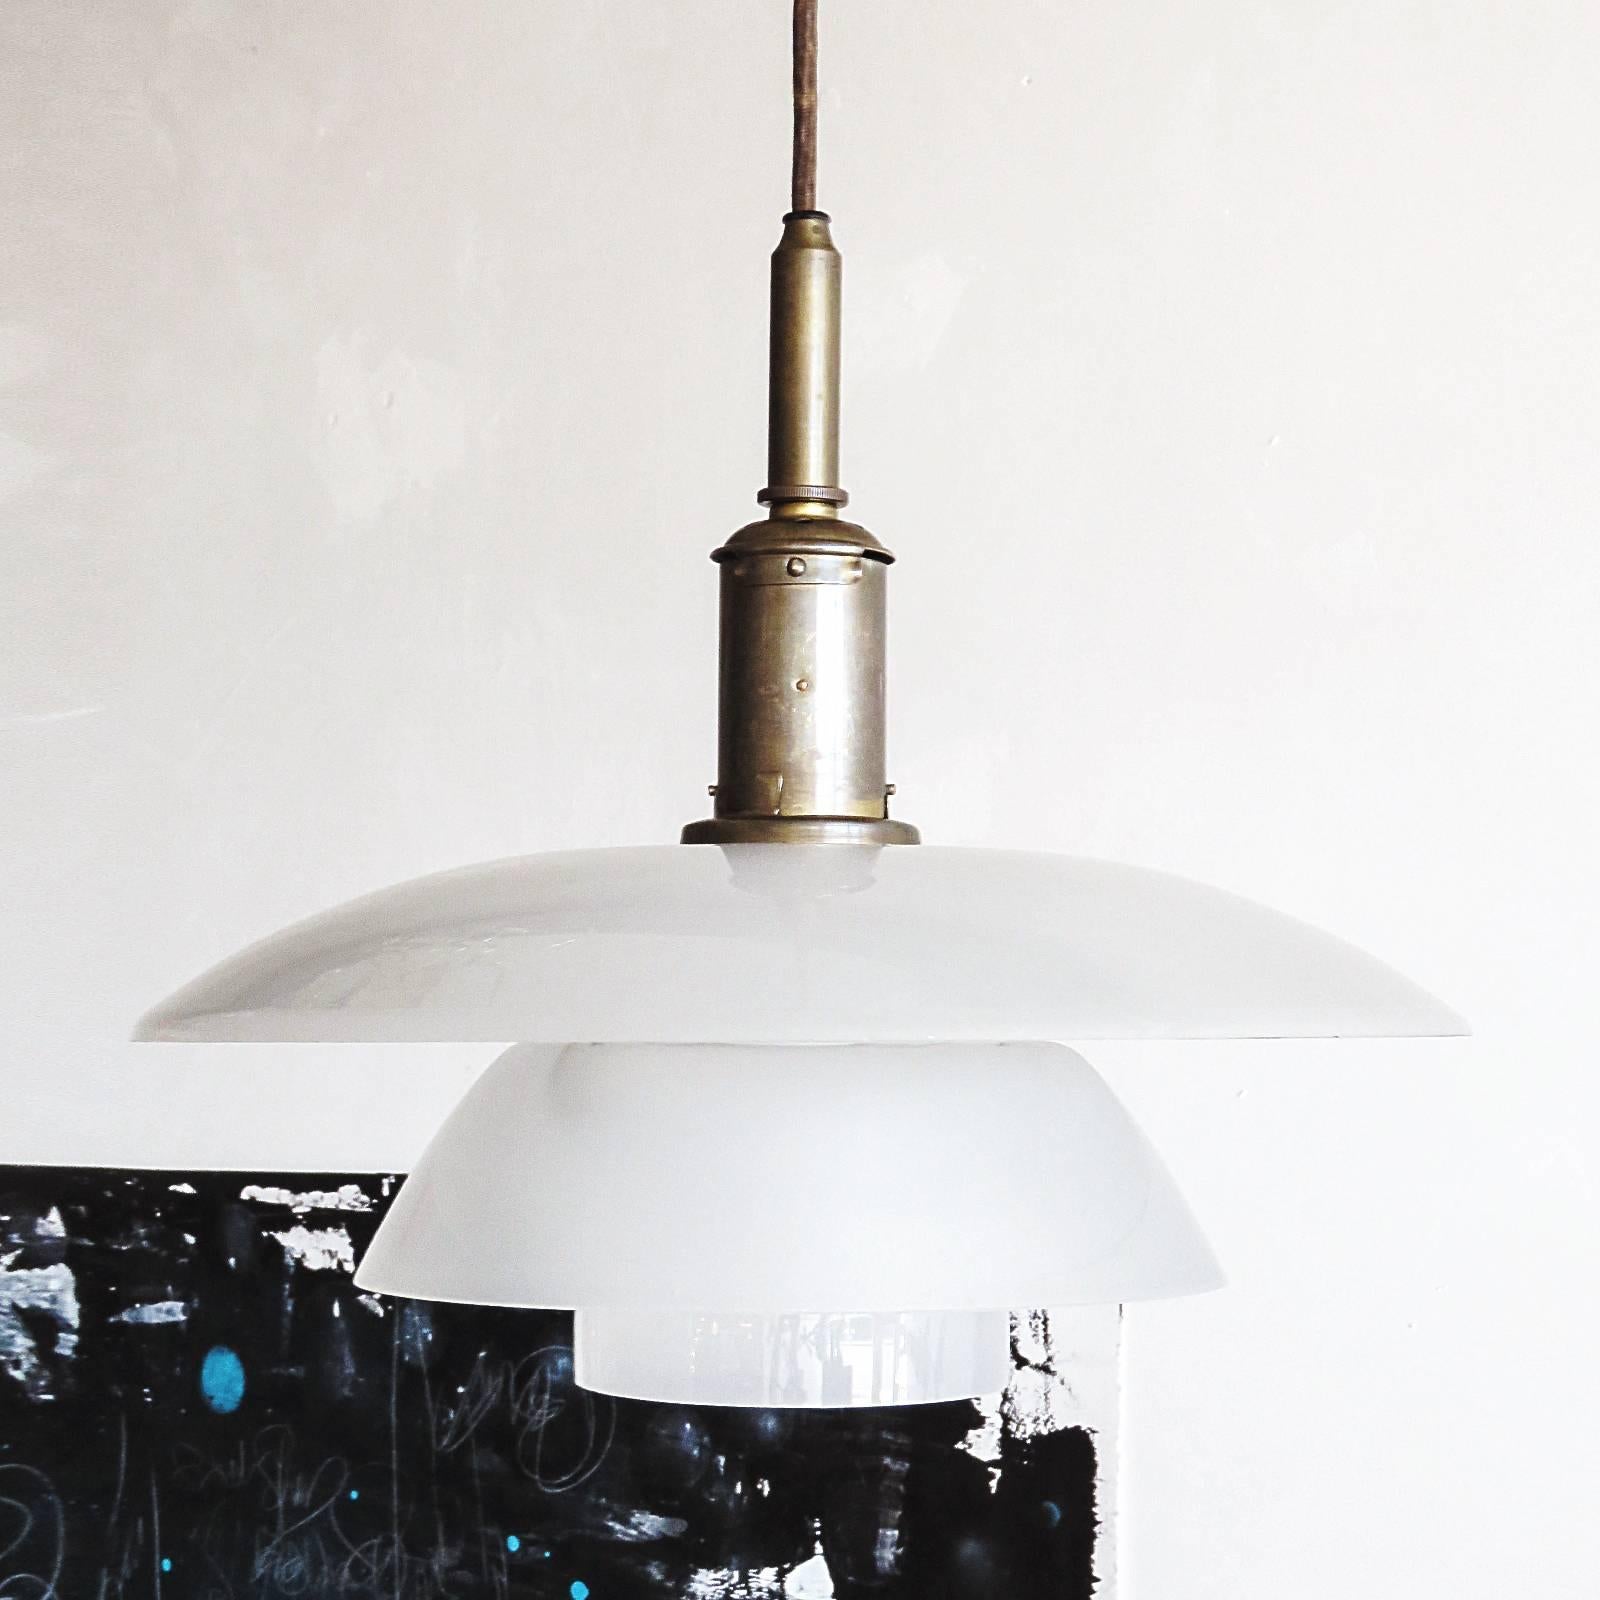 rare PH 4/4 pendant light by Poul Henningsen for Louis Poulsen with original shade set, in frosted glass and diffuser in matte frosted glass, original patinated brass bayonet socket housing and patinated brass canopy.